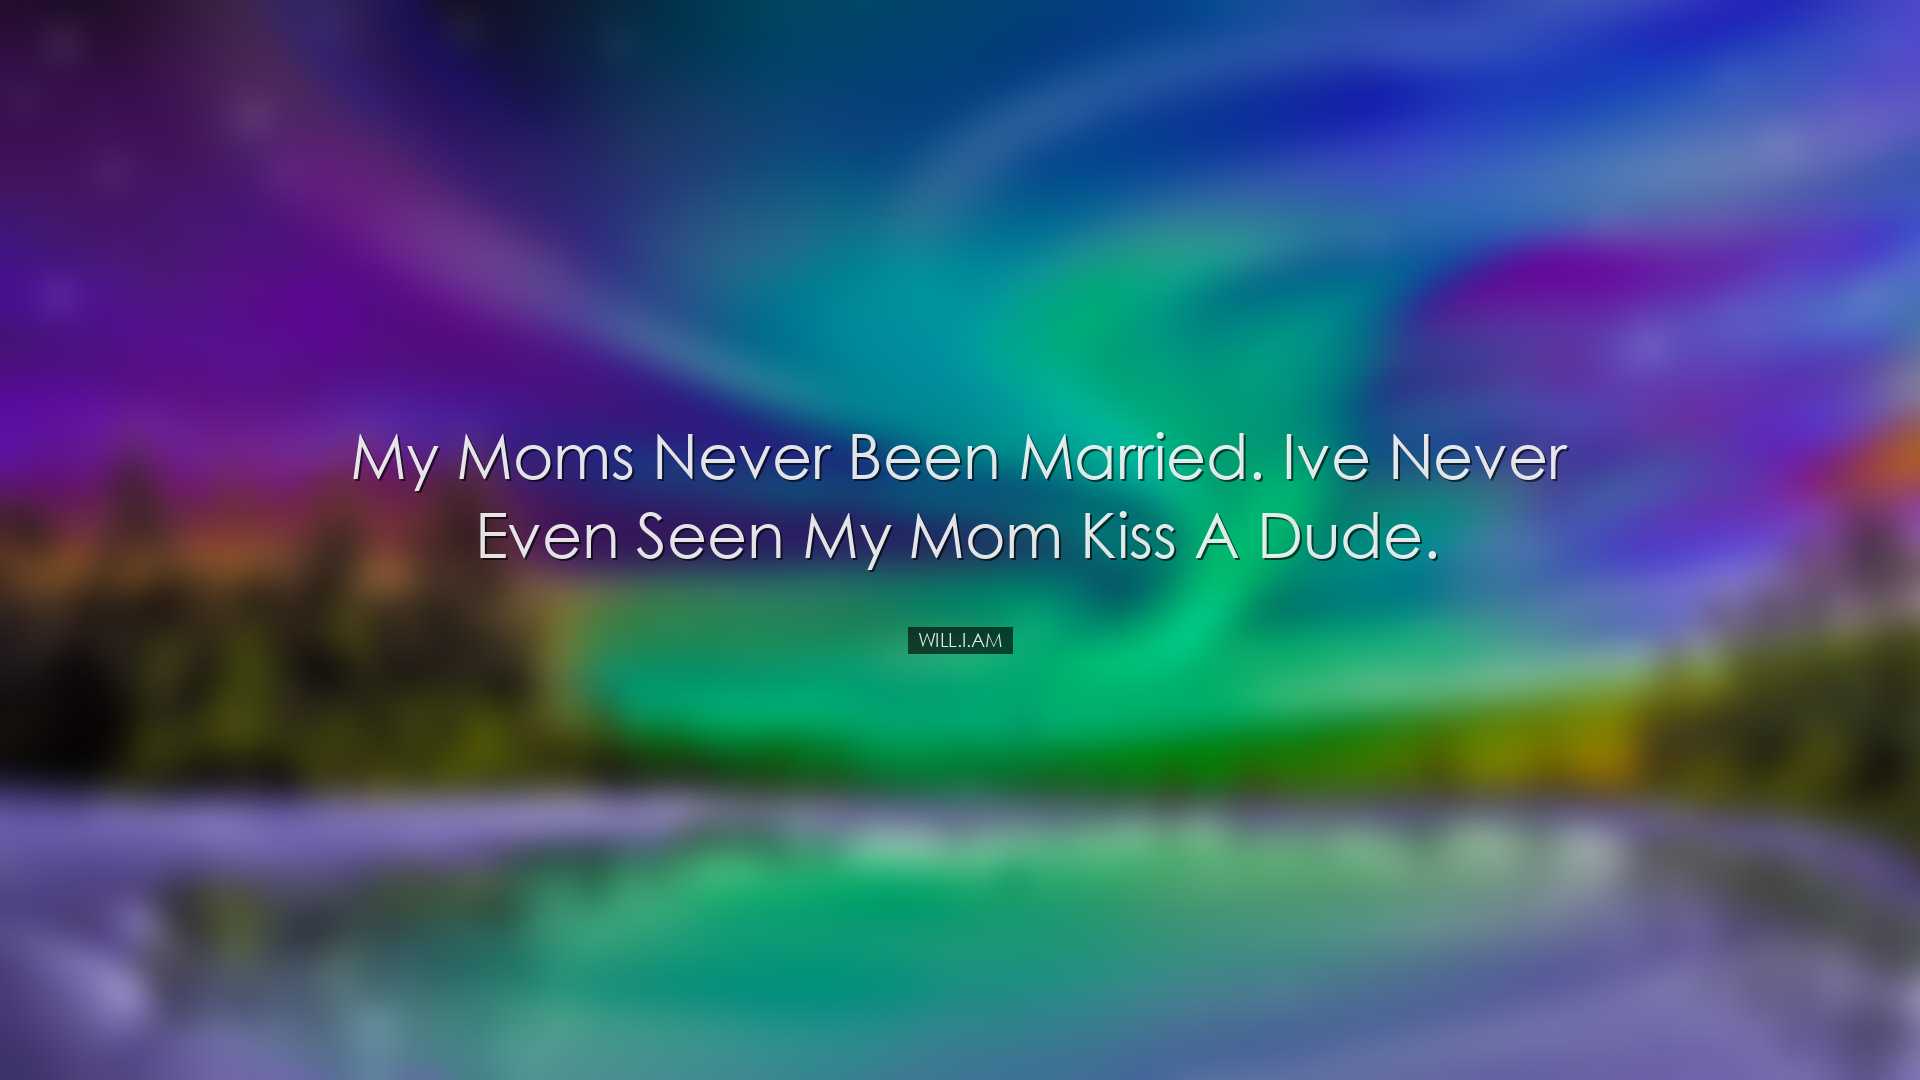 My moms never been married. Ive never even seen my mom kiss a dude